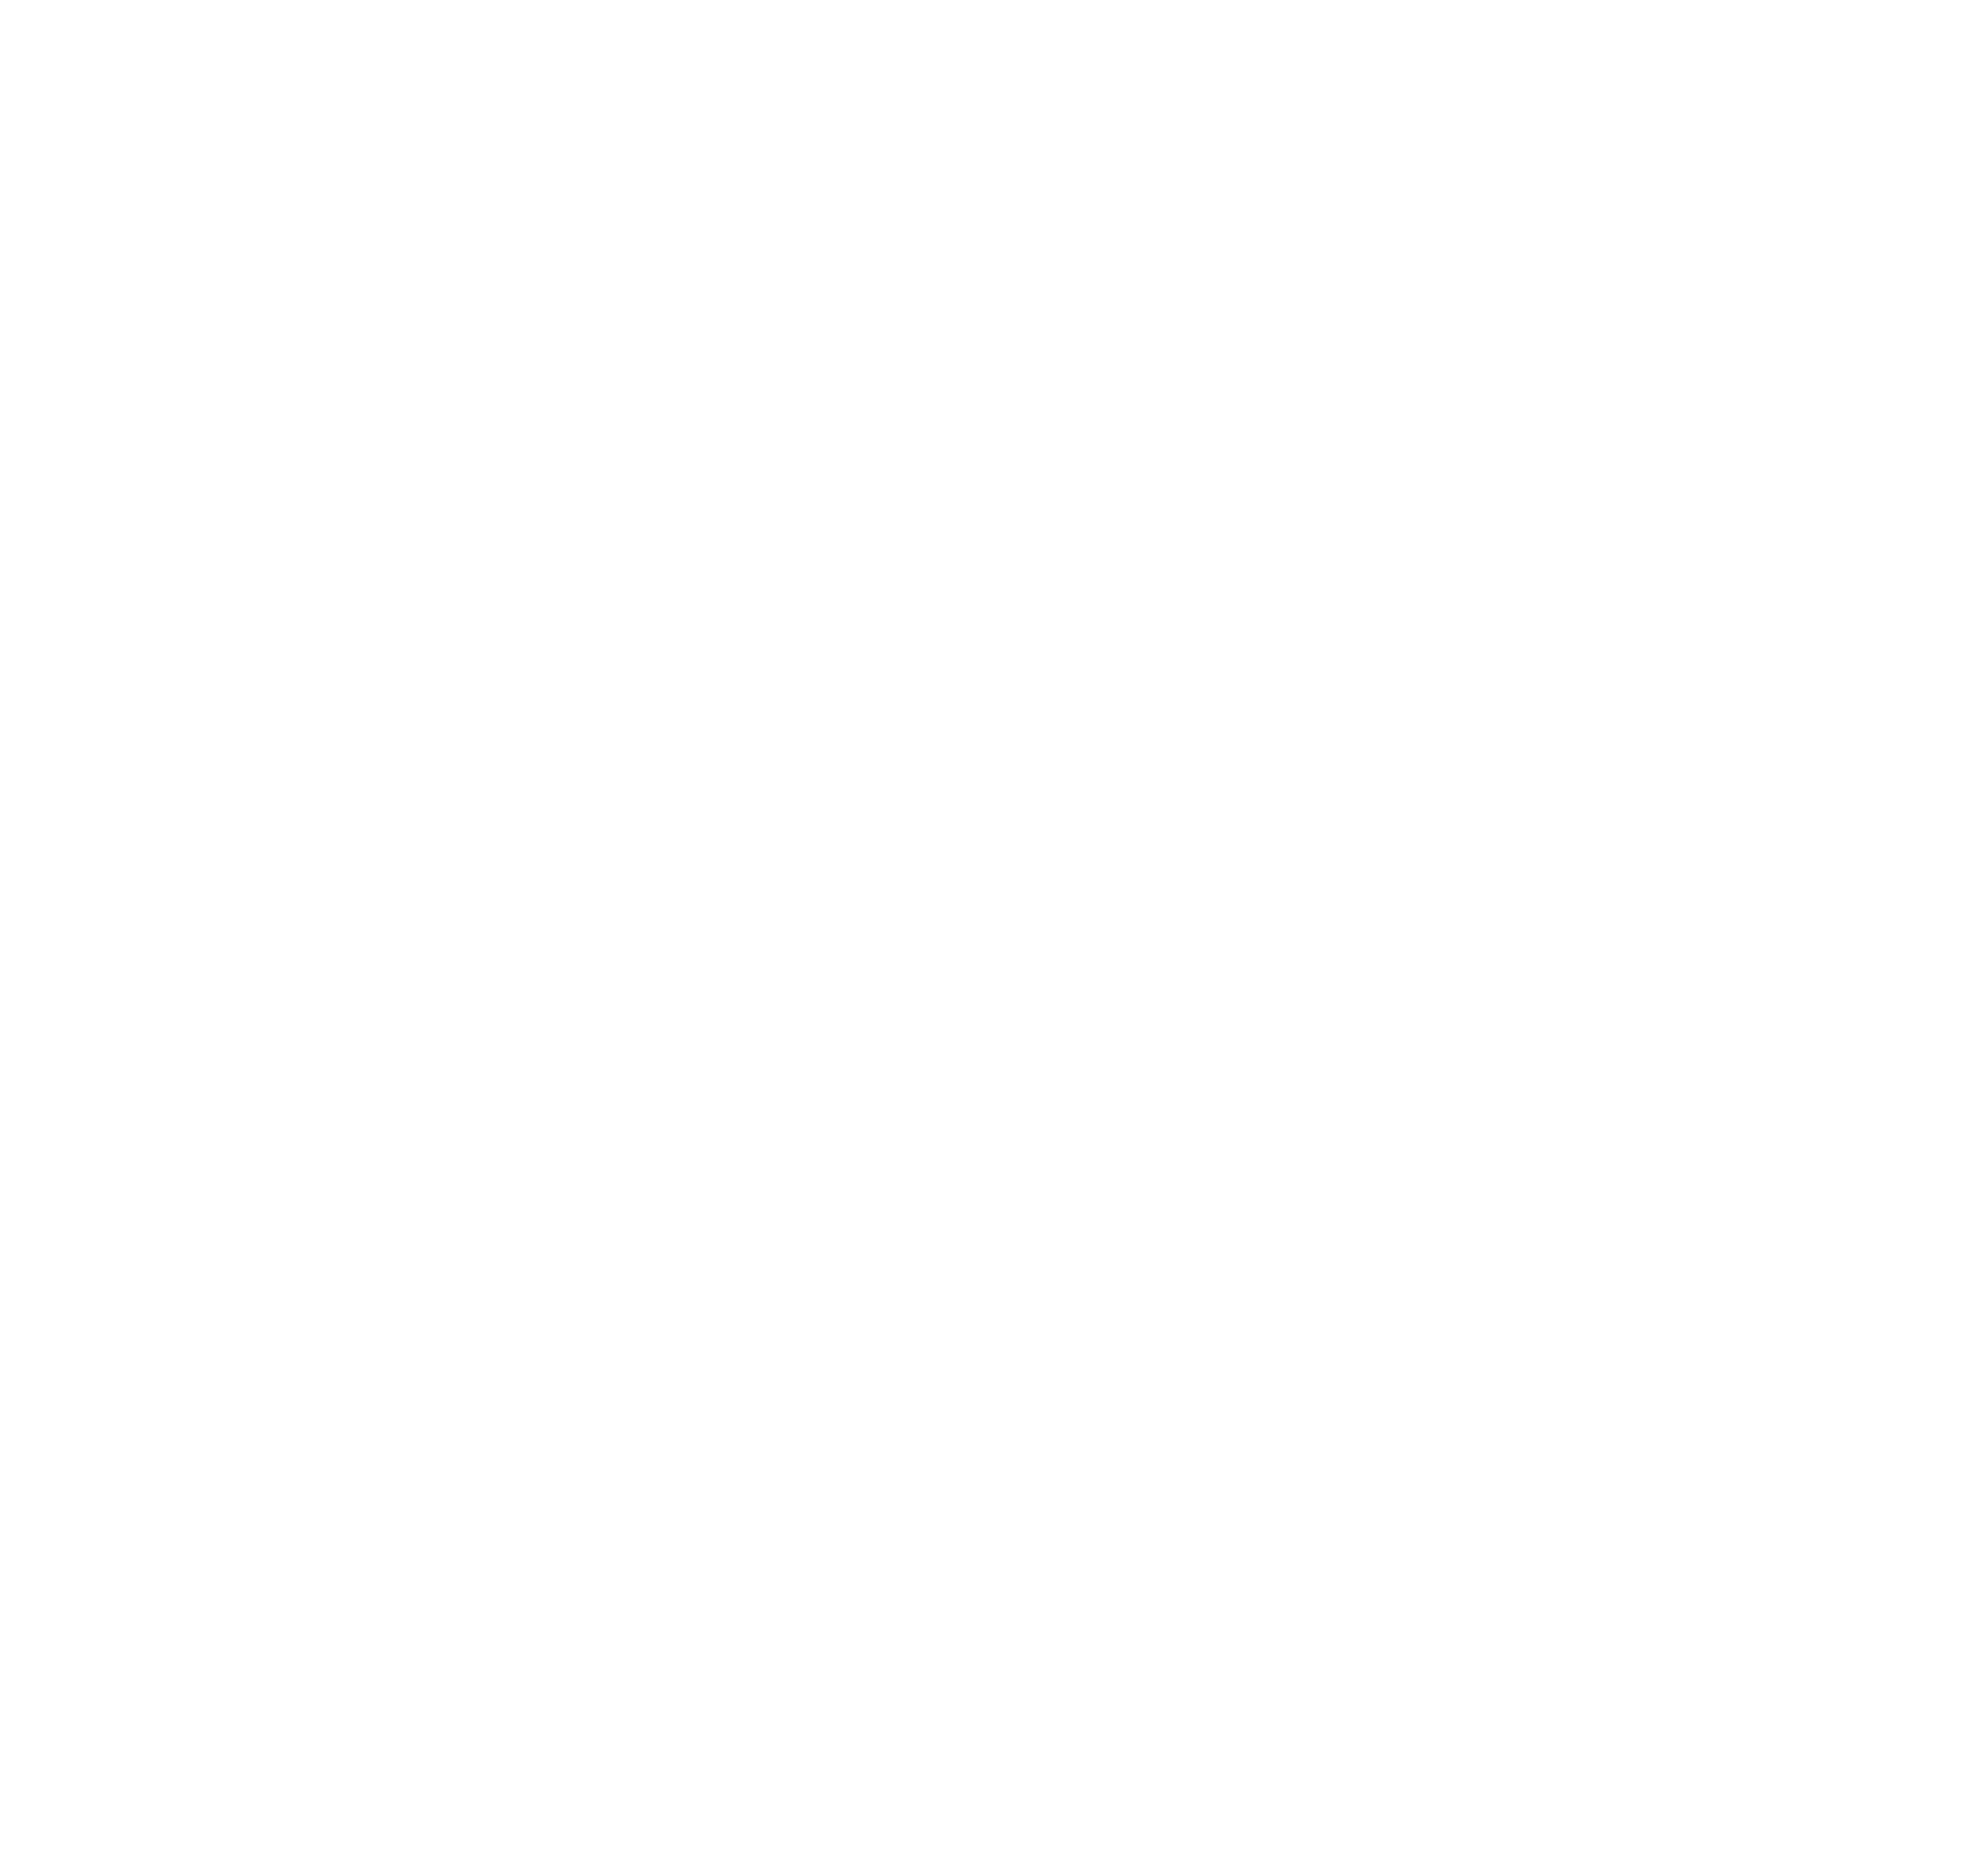 2019 Brighter Future Scholarship Pageant All Rights.